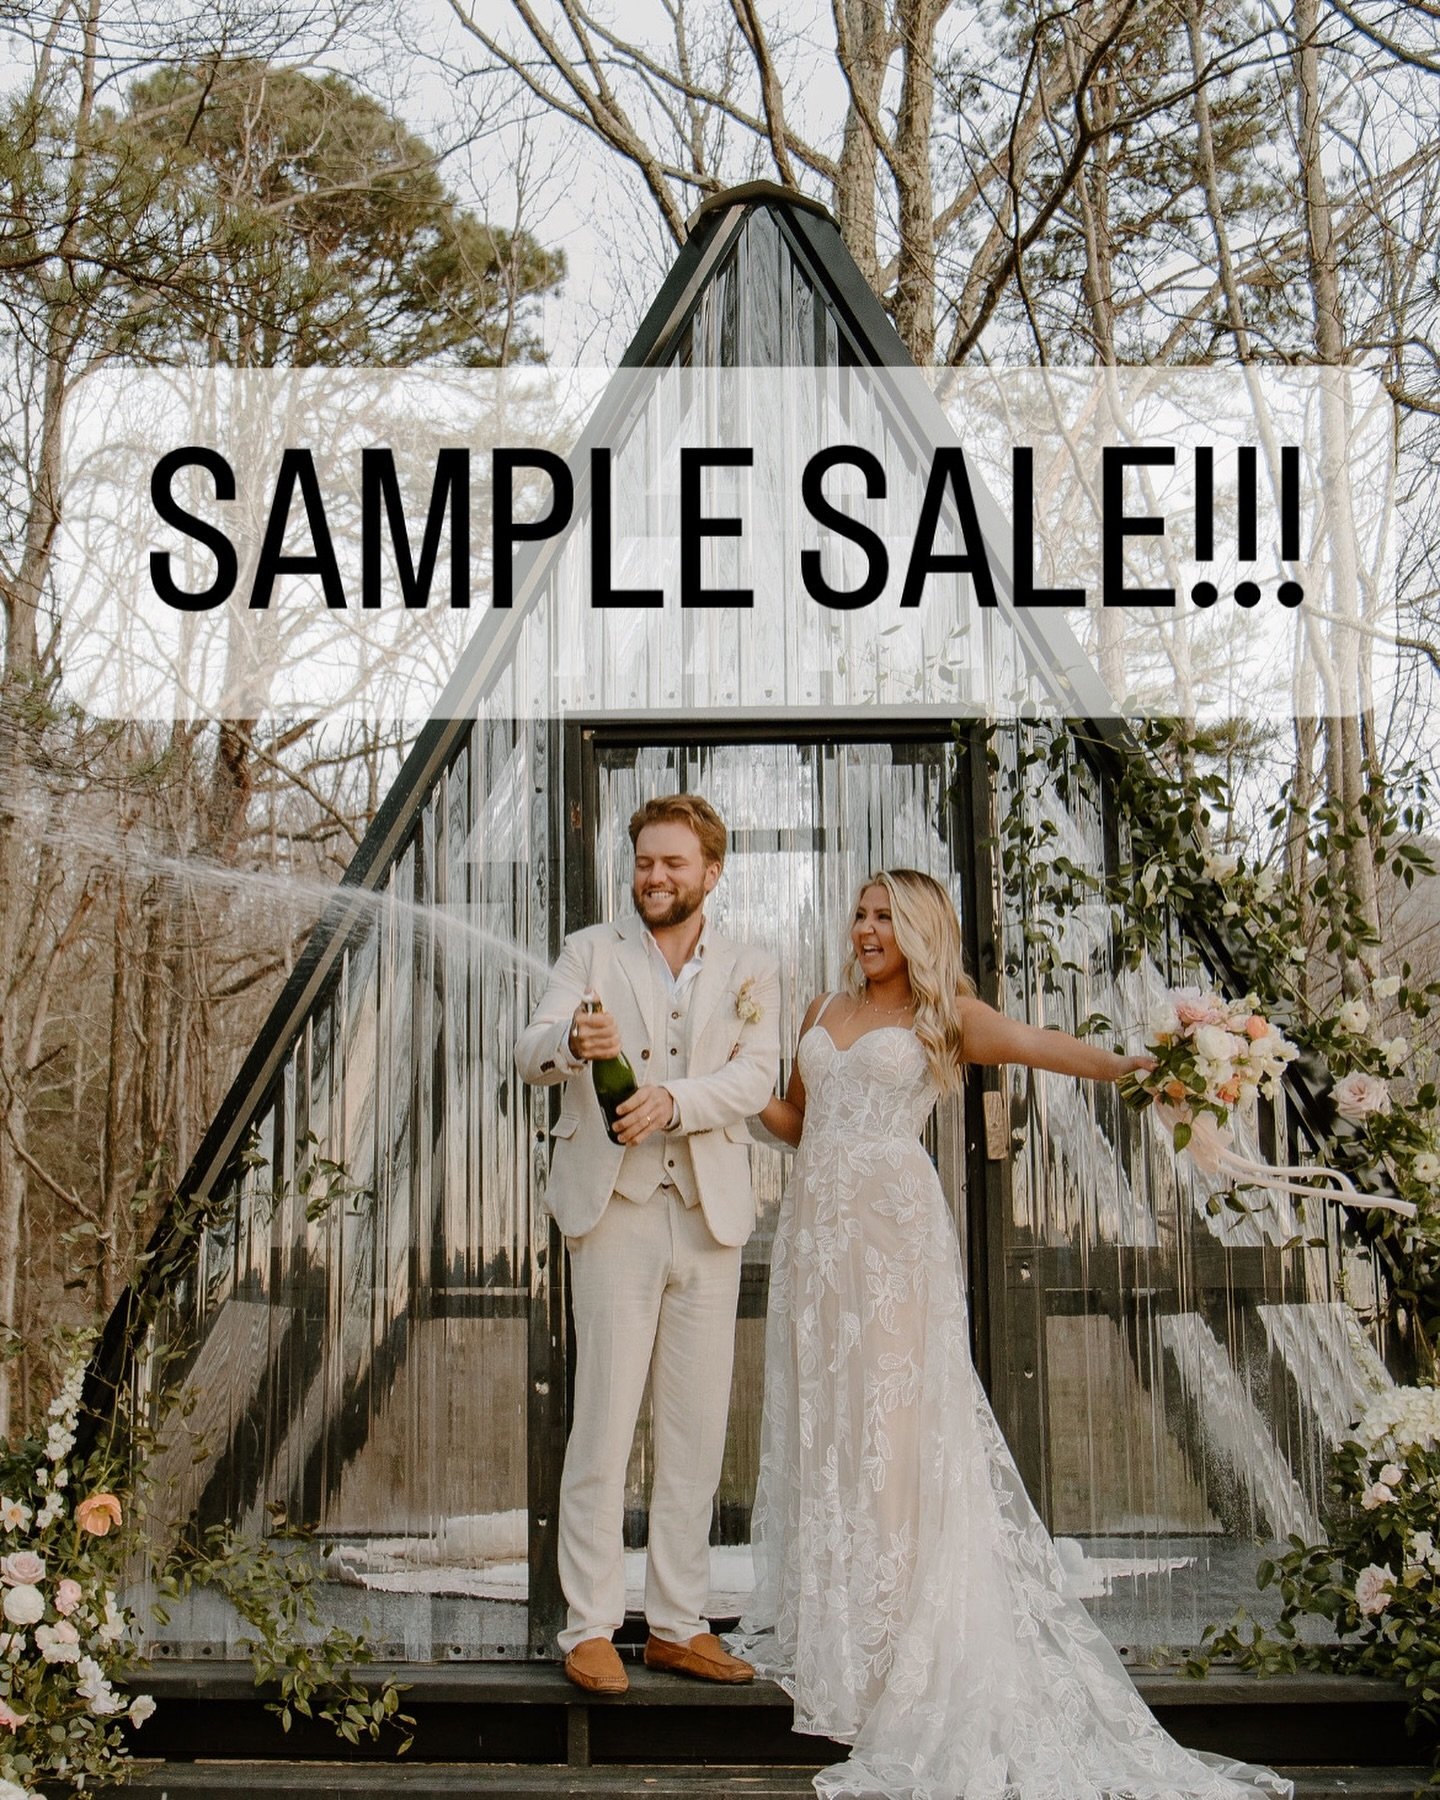 It&rsquo;s that special time of year- SAMPLE SALE time! 
🤩
We will be hosting our largest sample sale since pre-covid times from Friday, 5/31/24 through Sunday, 6/2/24. All gowns will be $999. The gowns will mostly be bridal size 10 - 14, with aroun